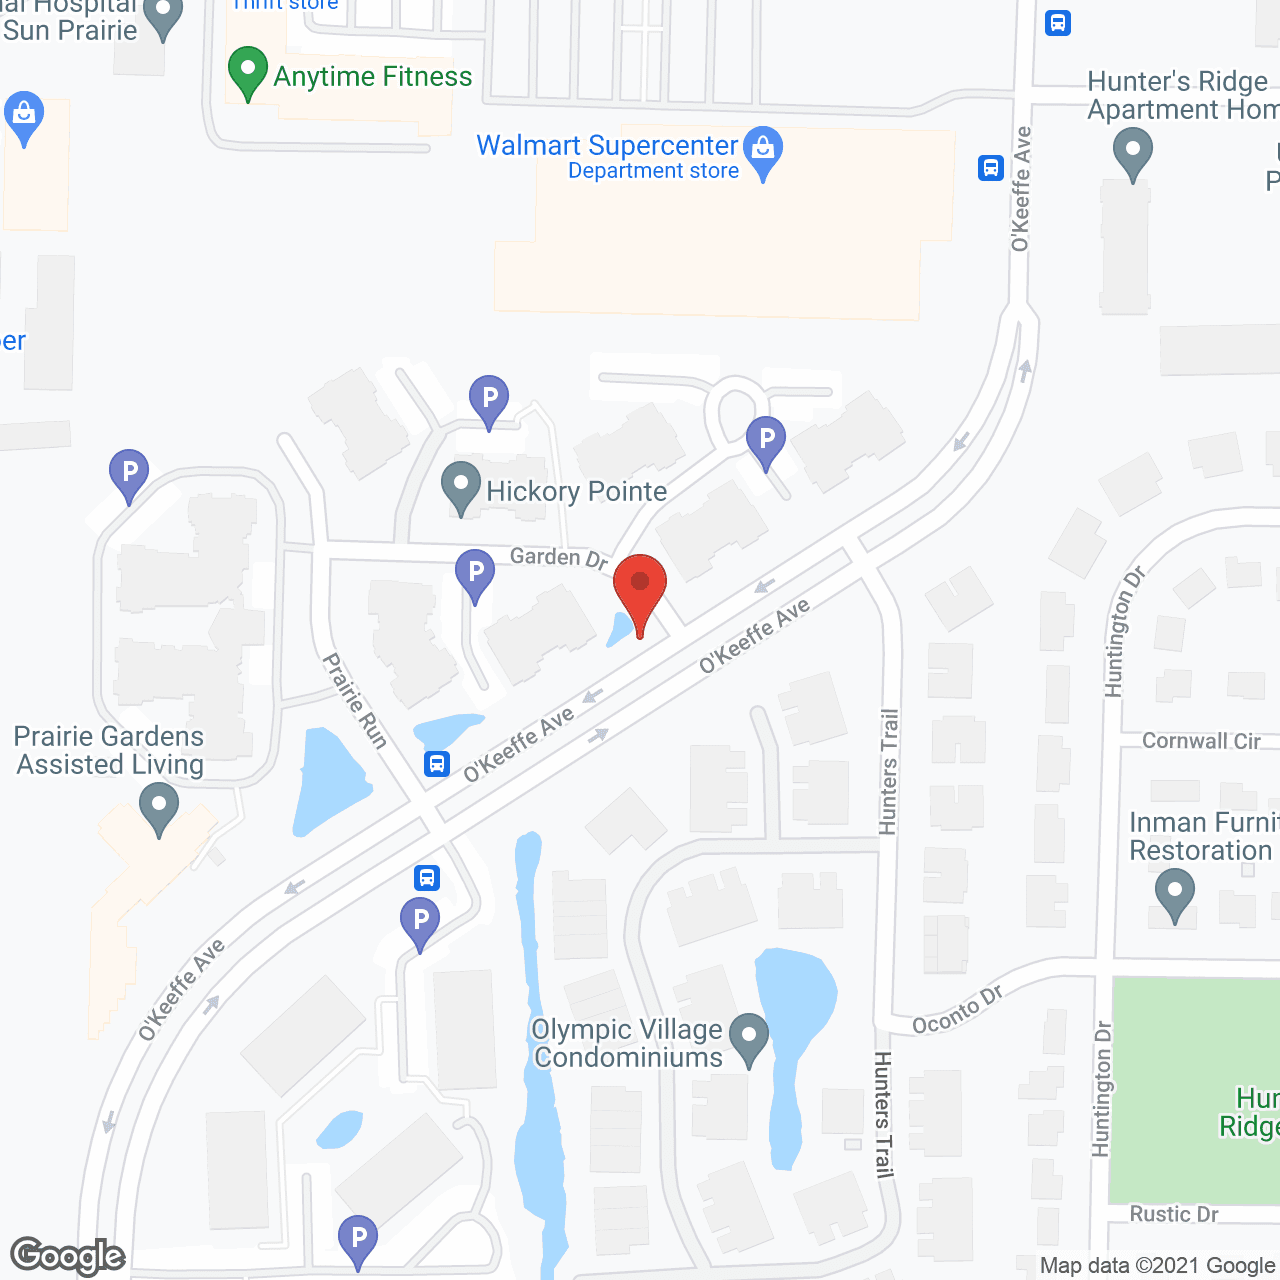 Prairie Gardens Assisted Living in google map